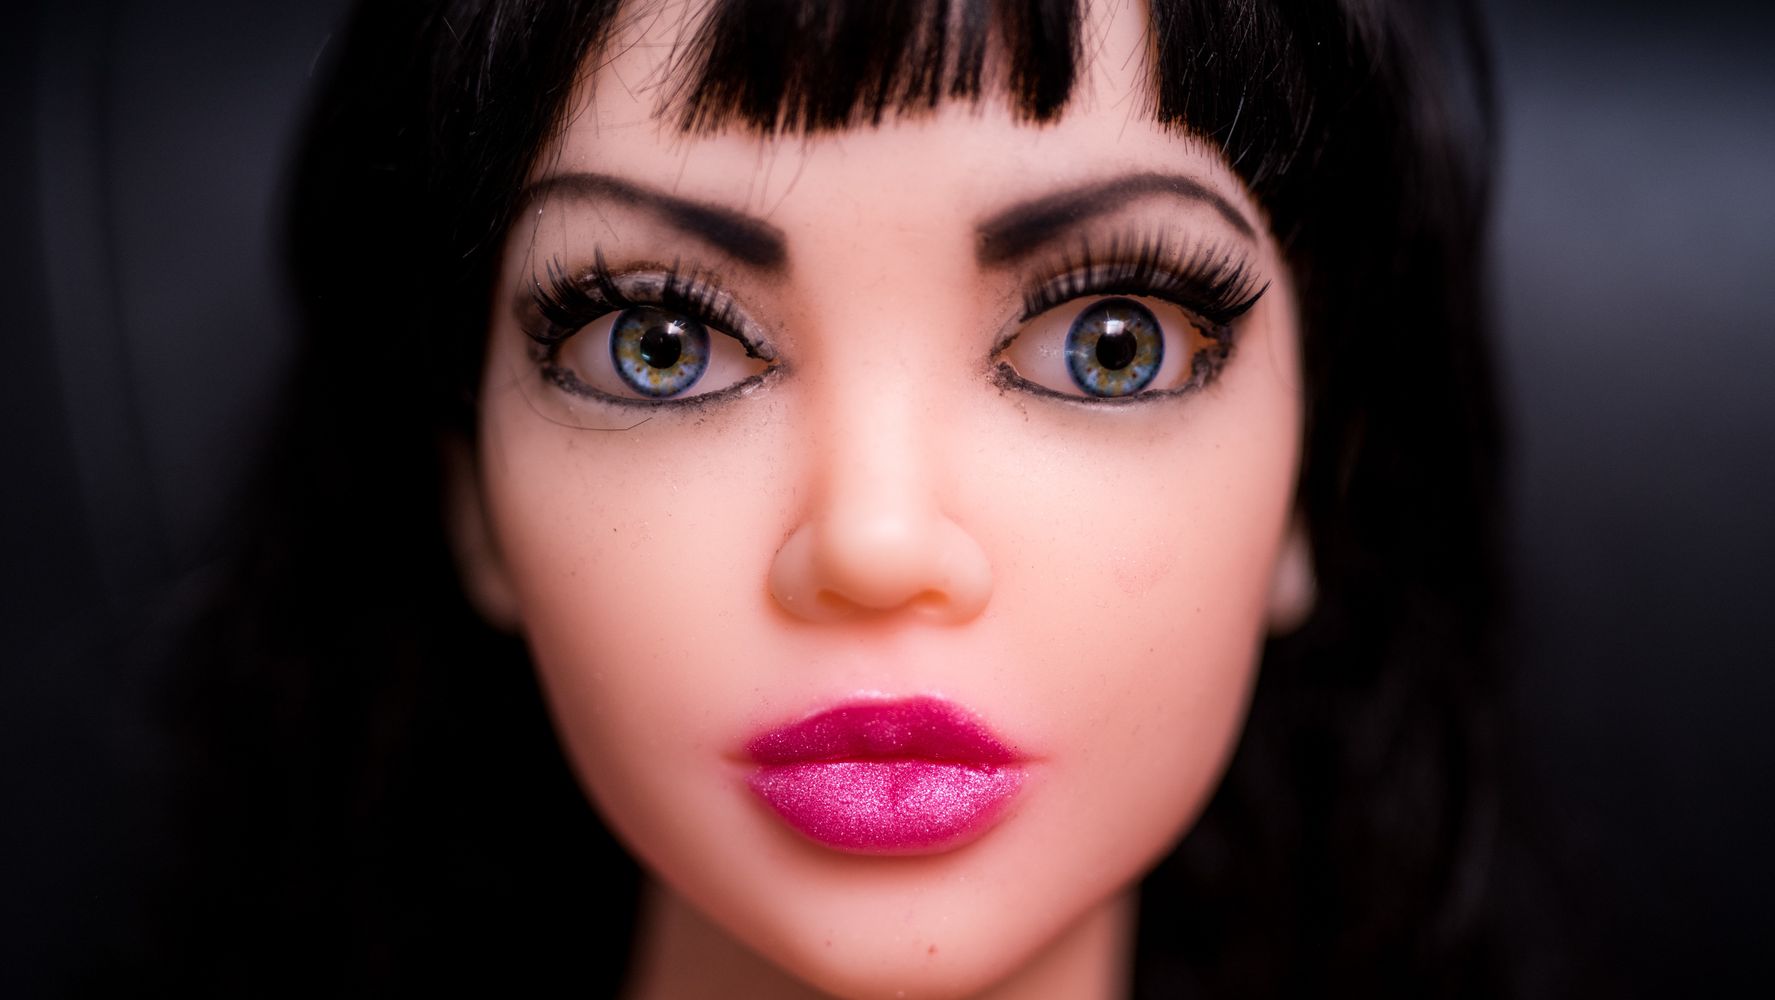 A Sex Doll Brothel Is Coming To Toronto Huffpost Canada Weird News 9340